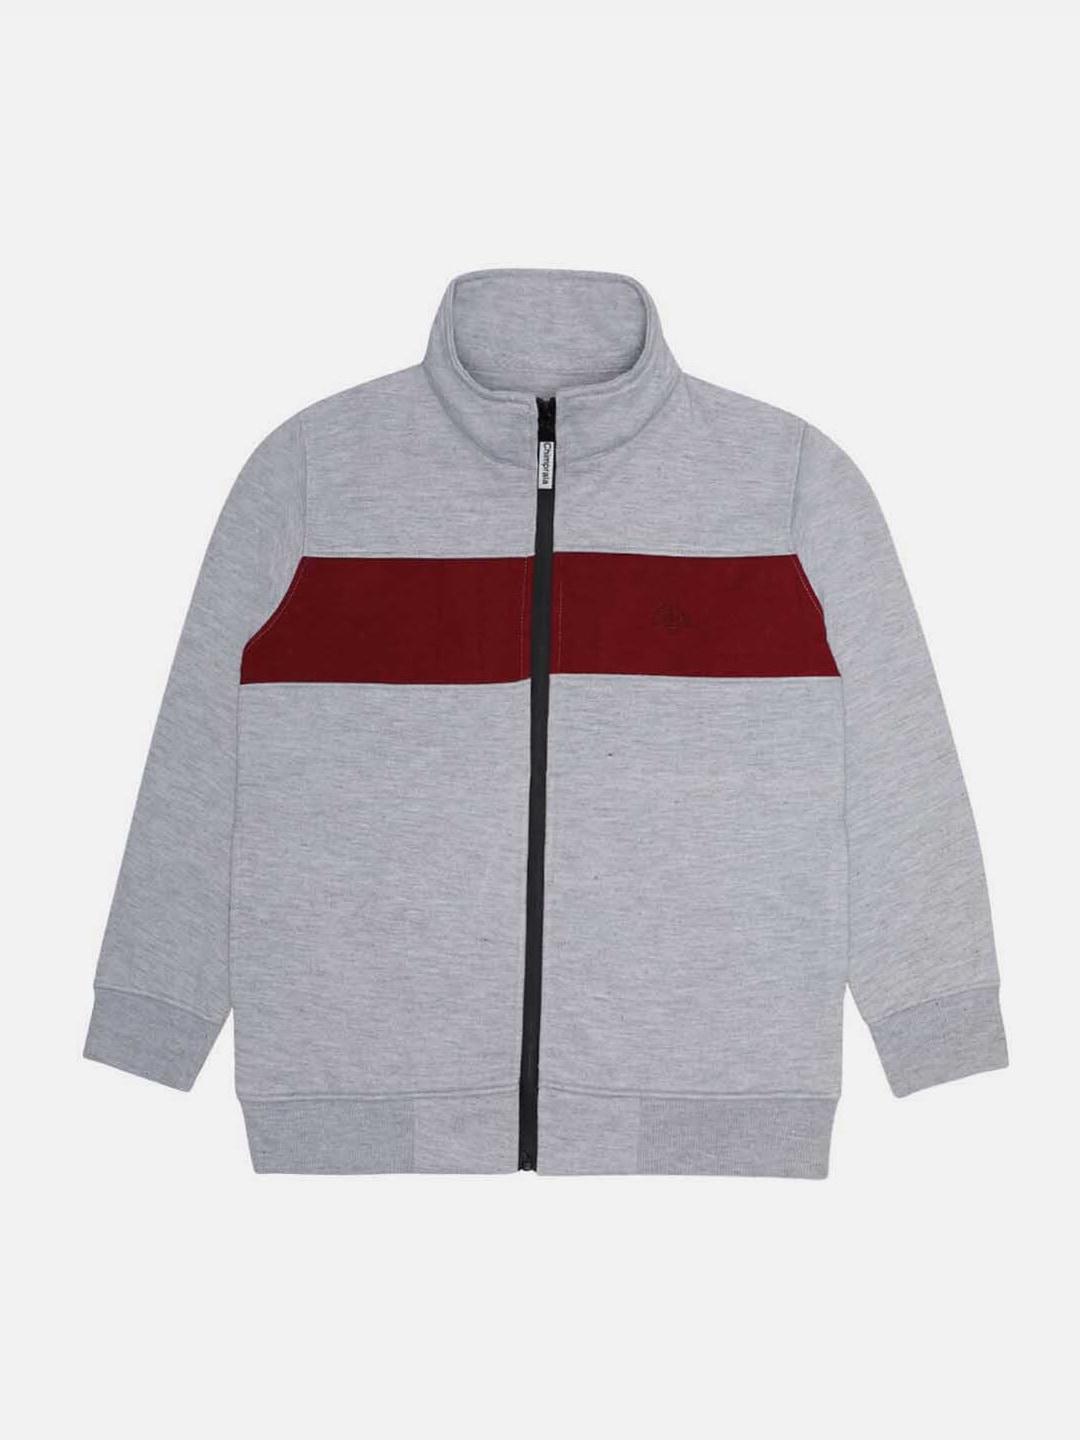 chimprala boys grey colourblocked lightweight antimicrobial crop outdoor sporty jacket with embroidered